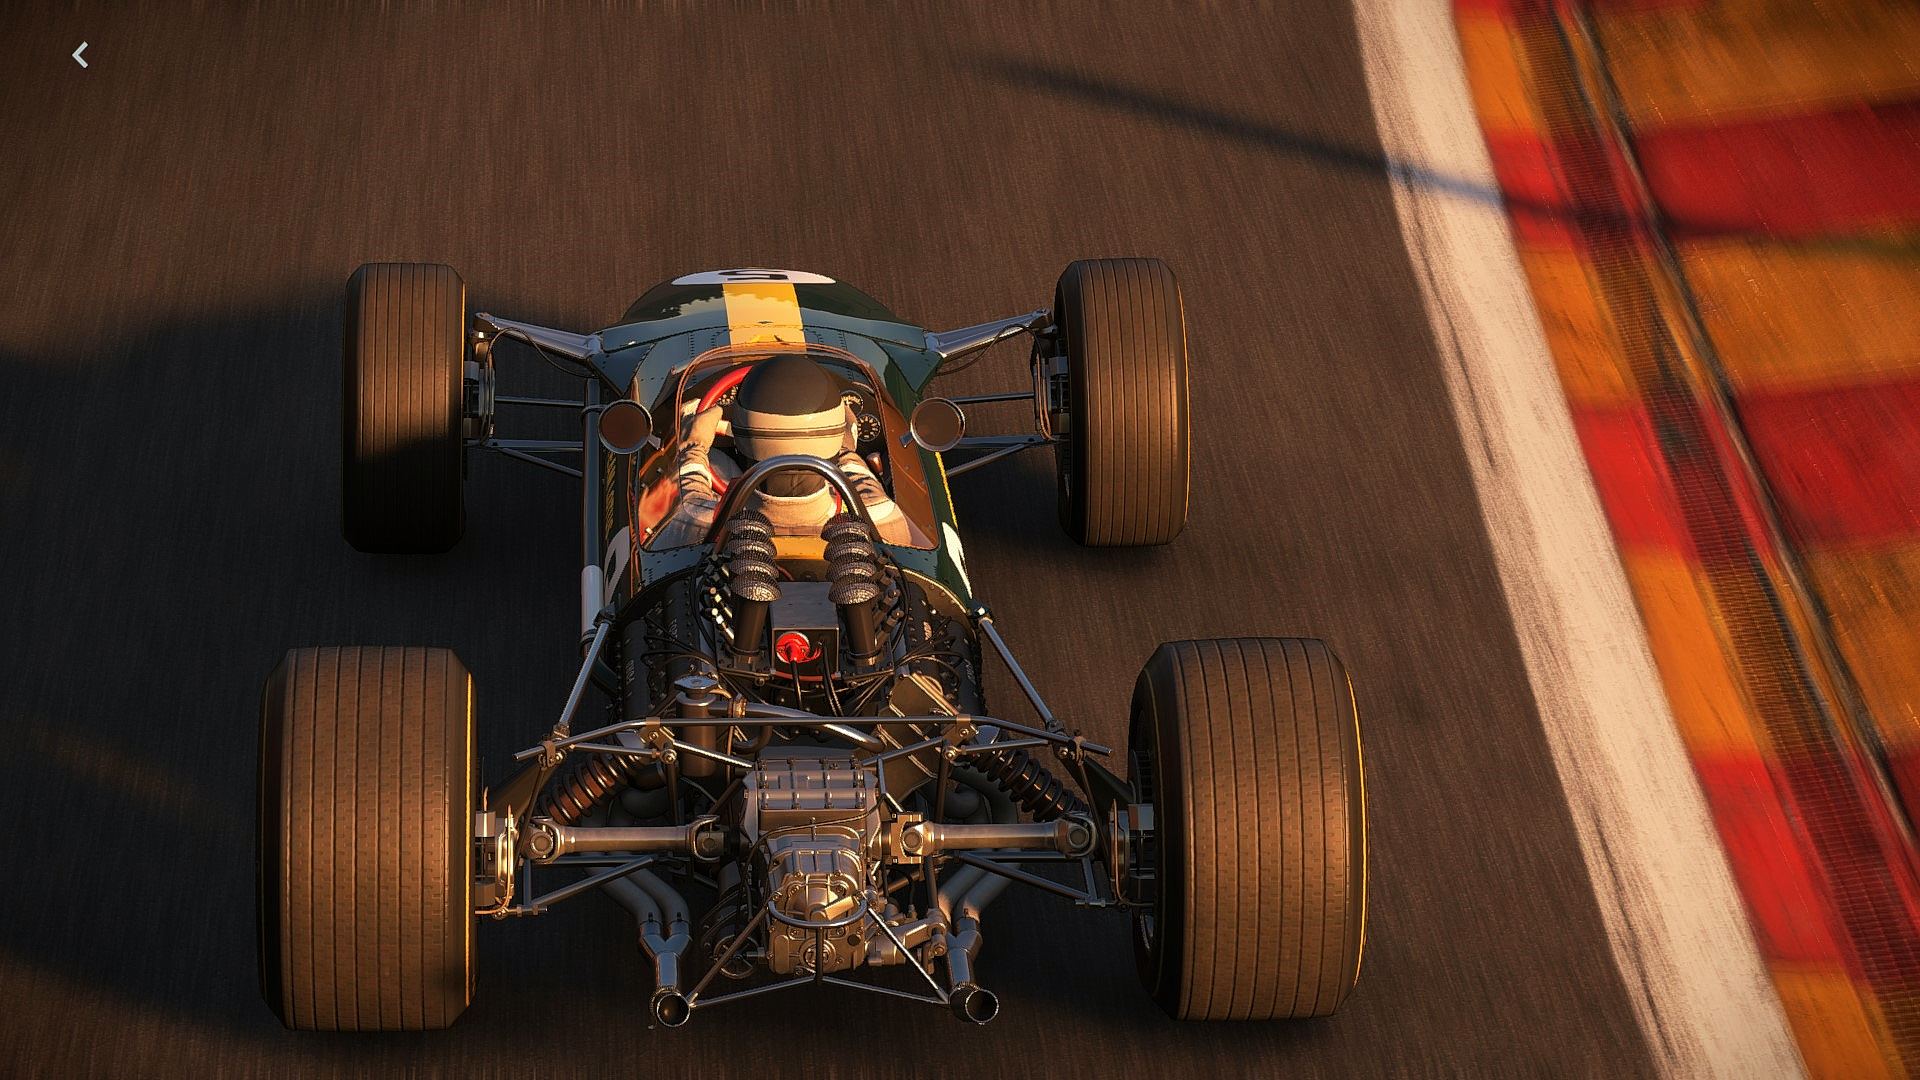 Spa Francorchamps 1968 Lotus 49 Project Cars Video Games 1920x1080